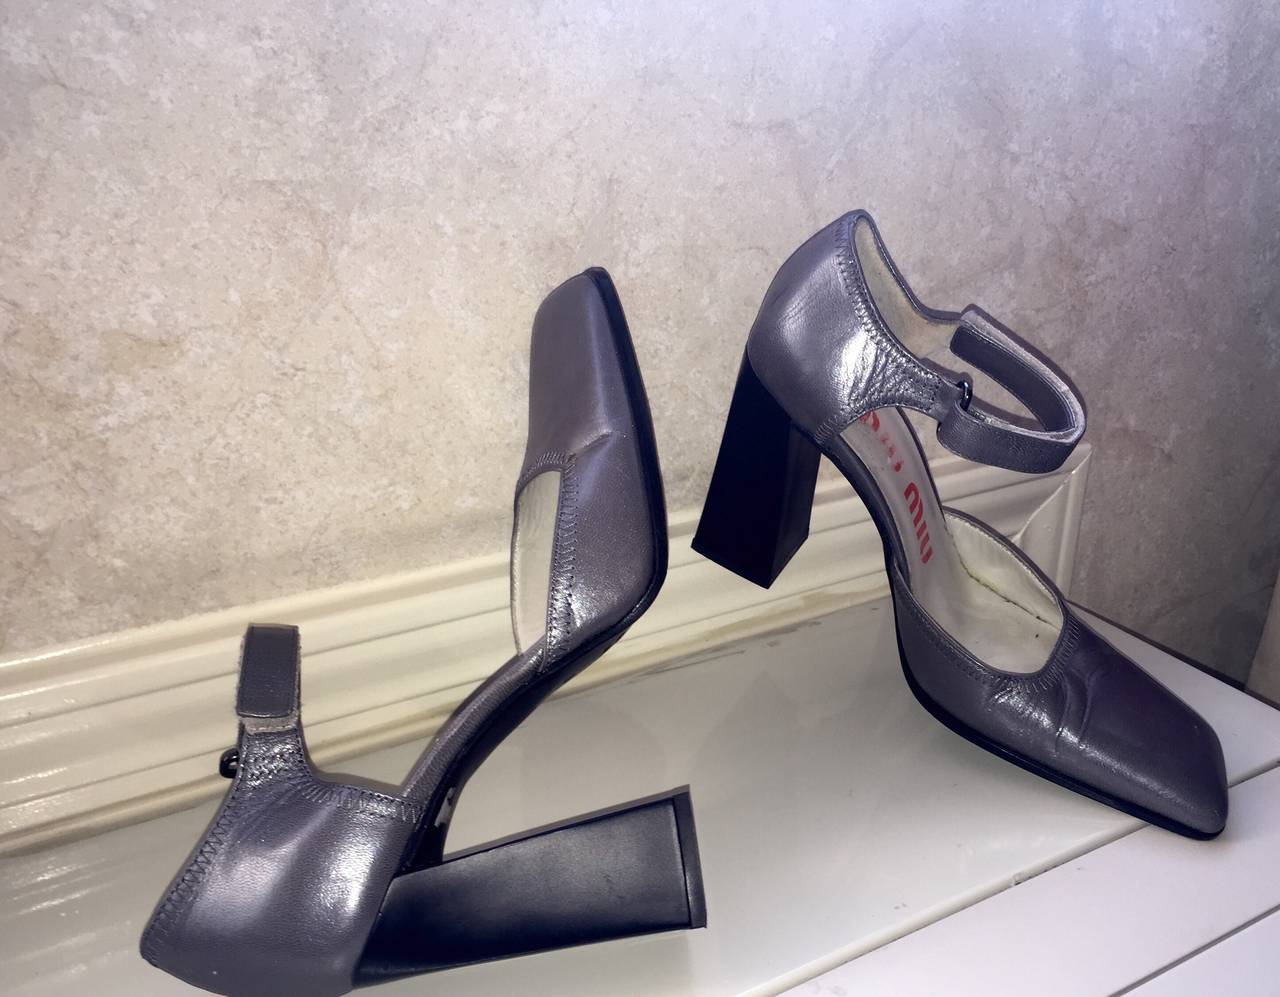 Incredibly rare 1990s Miu Miu heels! Architectural style, with a blocked heel, and asymmetrical toe. Perfect gunmetal leather that goes with everything! Can easily be dressed up or down. In great condition, with very minor wear to leather. Made in